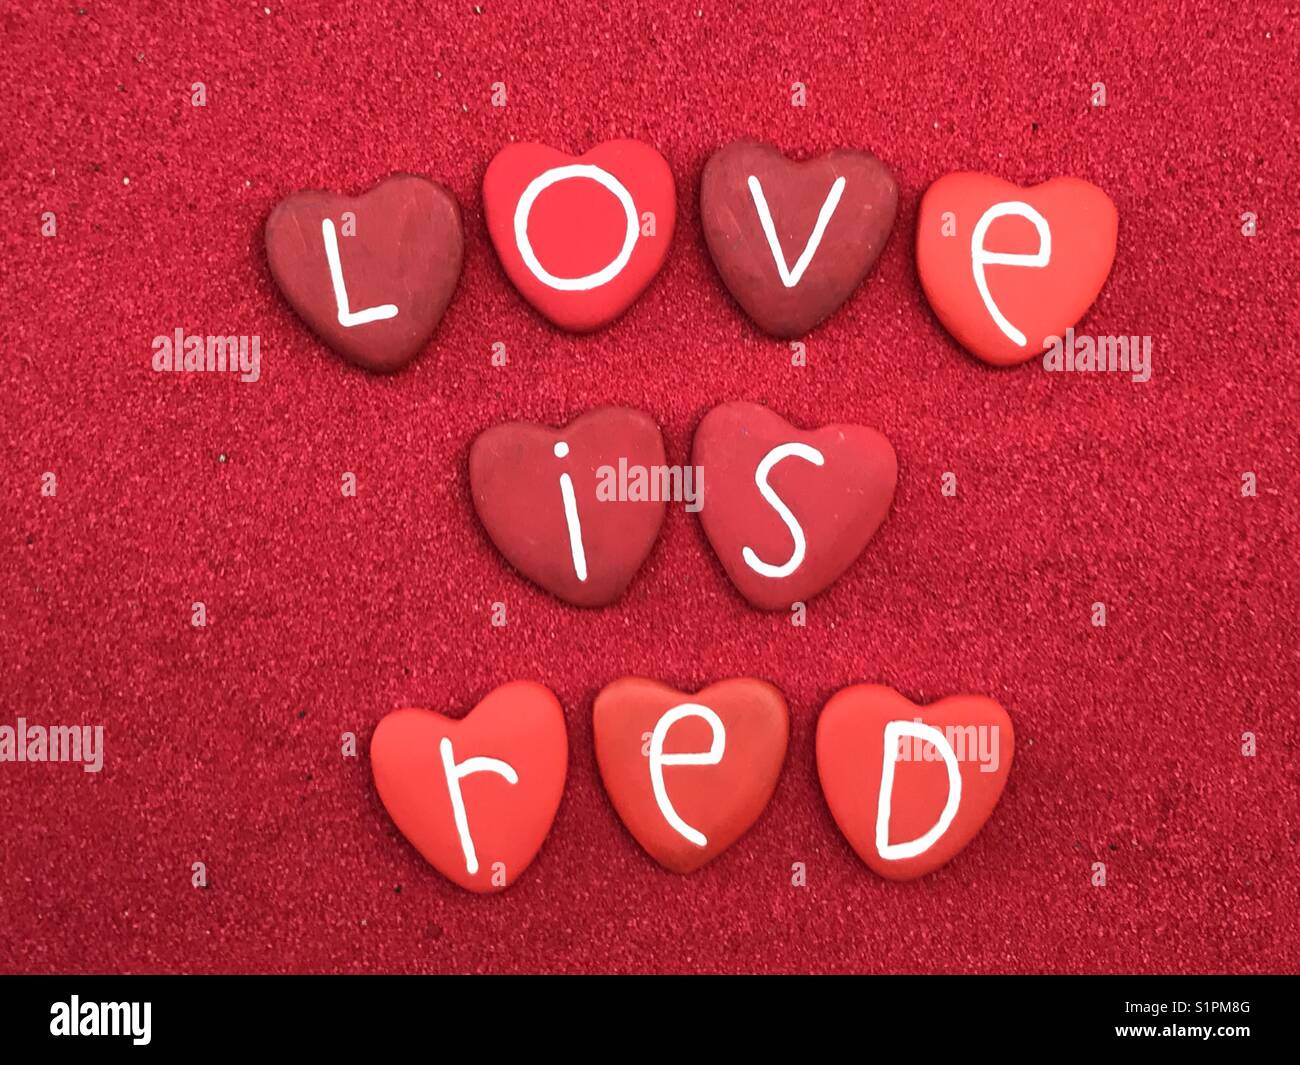 Love is red Stock Photo